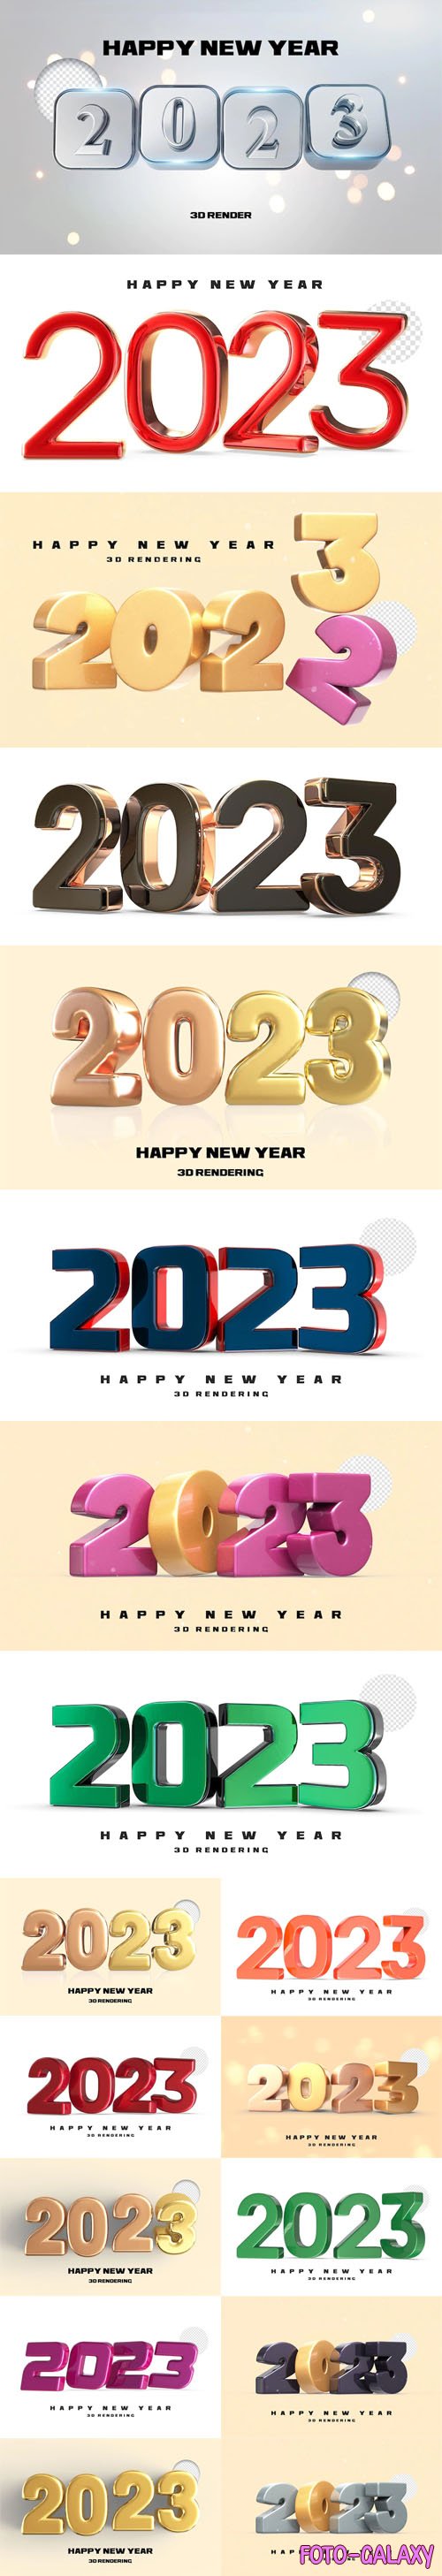 Happy New Year 2023 - 3D Rendering PSD Templates Collection